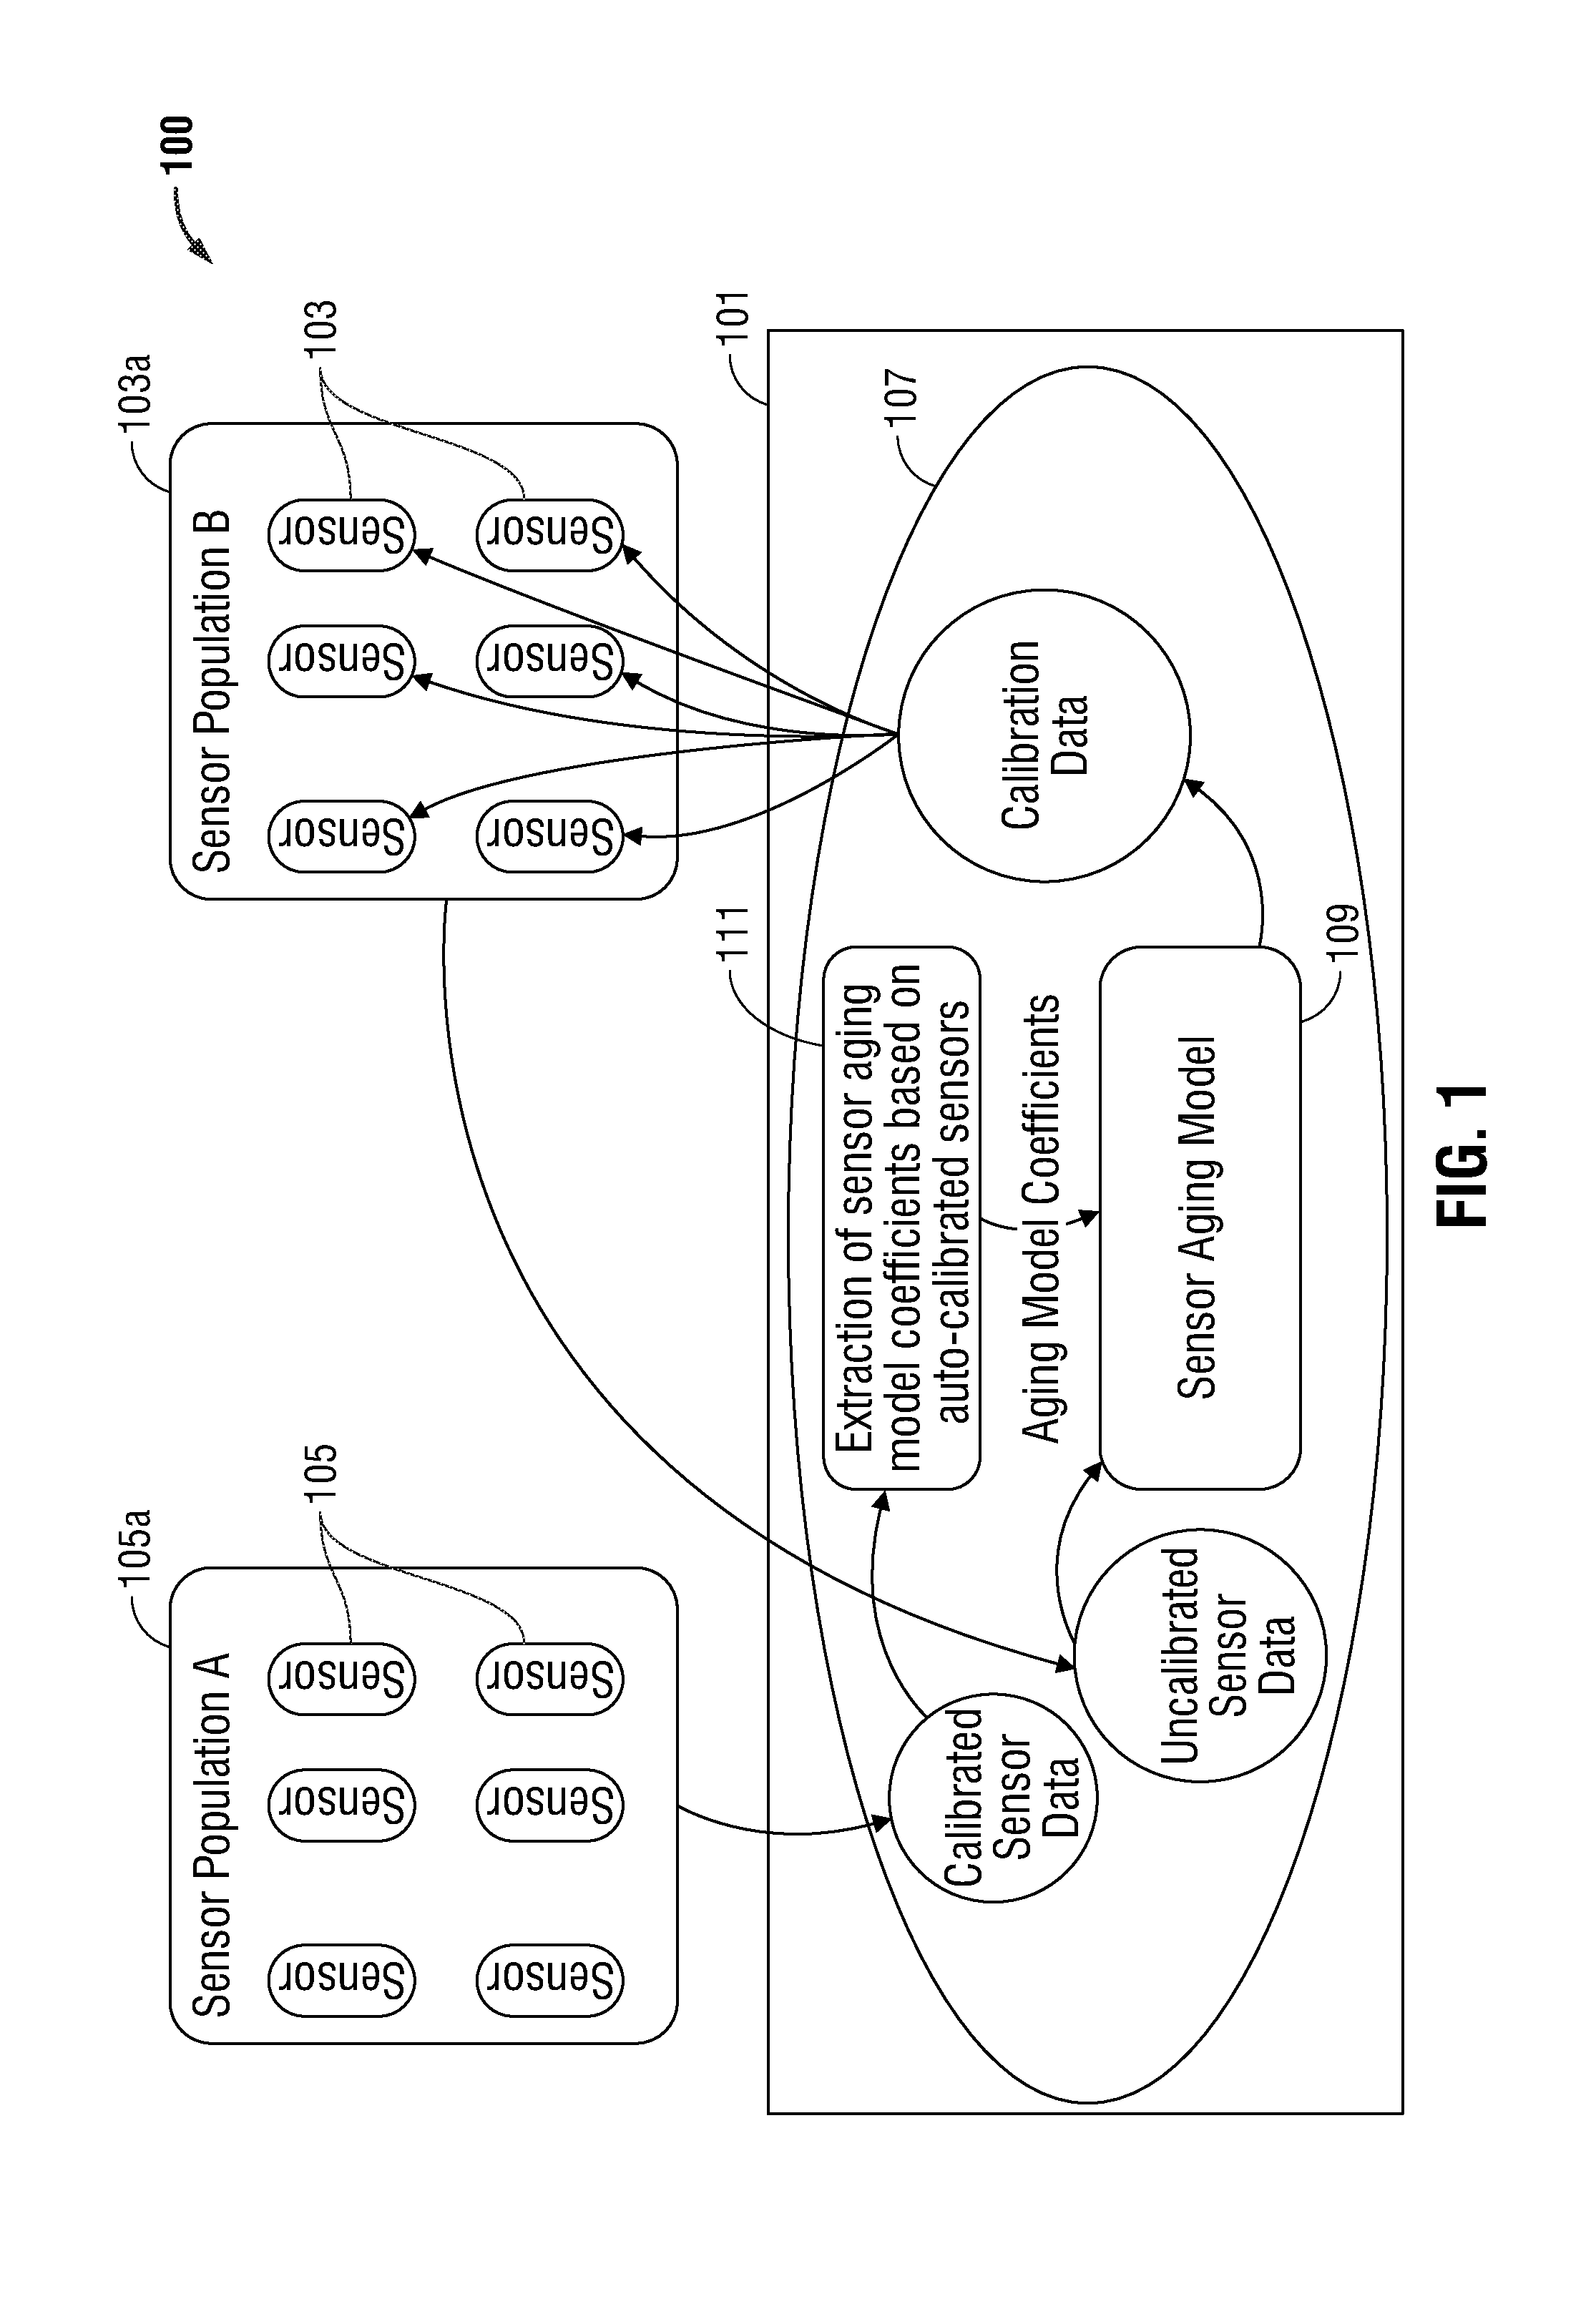 Sensor calibration systems and methods